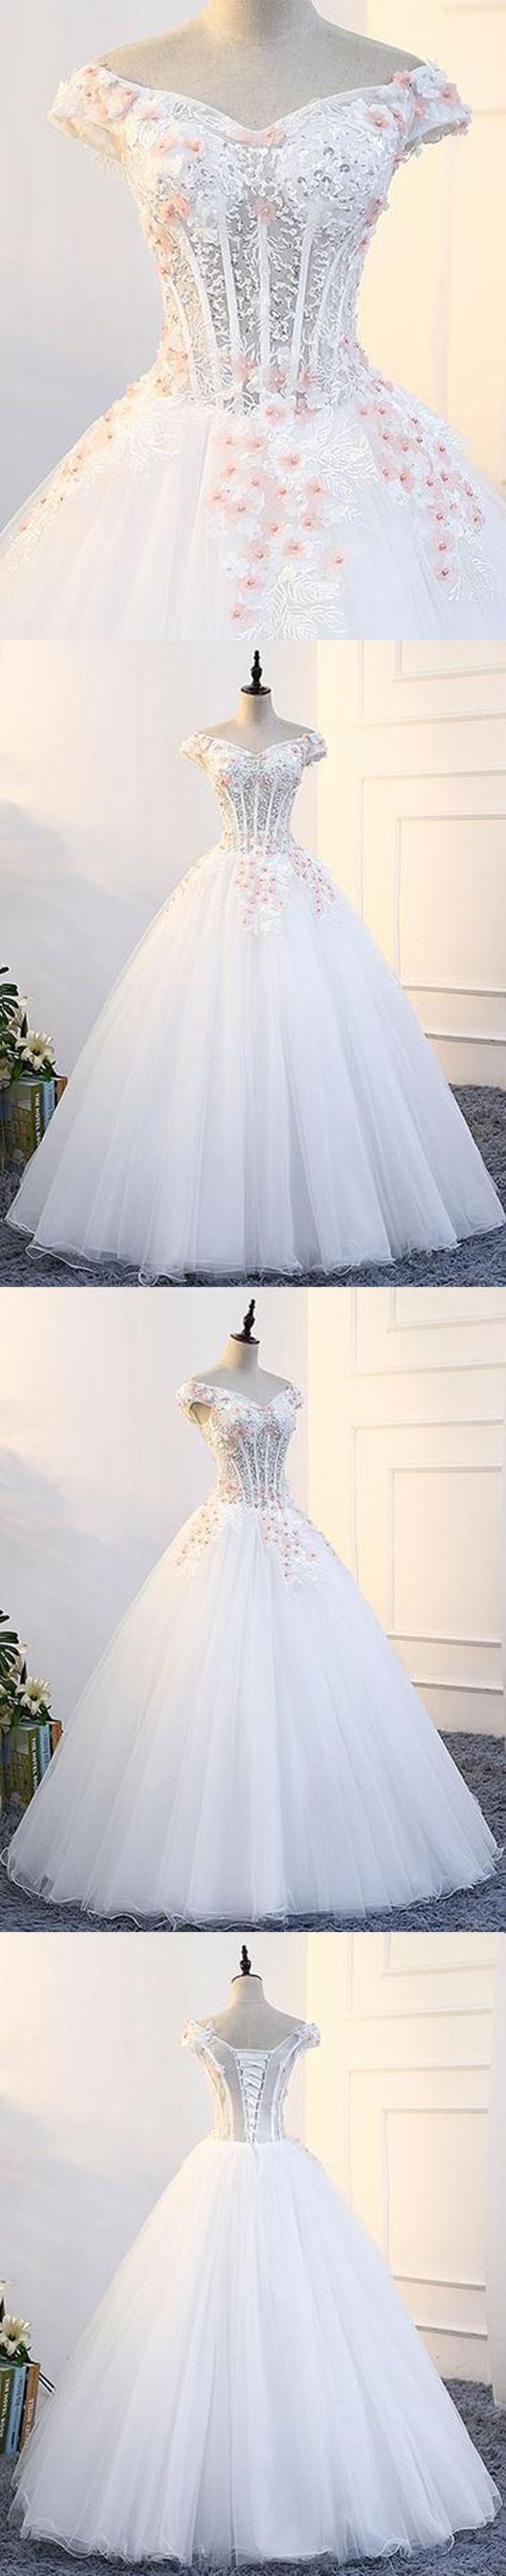 2018 Evening Gowns White Tulle Off Shoulder Prom Gown Wedding Dress With Cap Sleeves,w2384